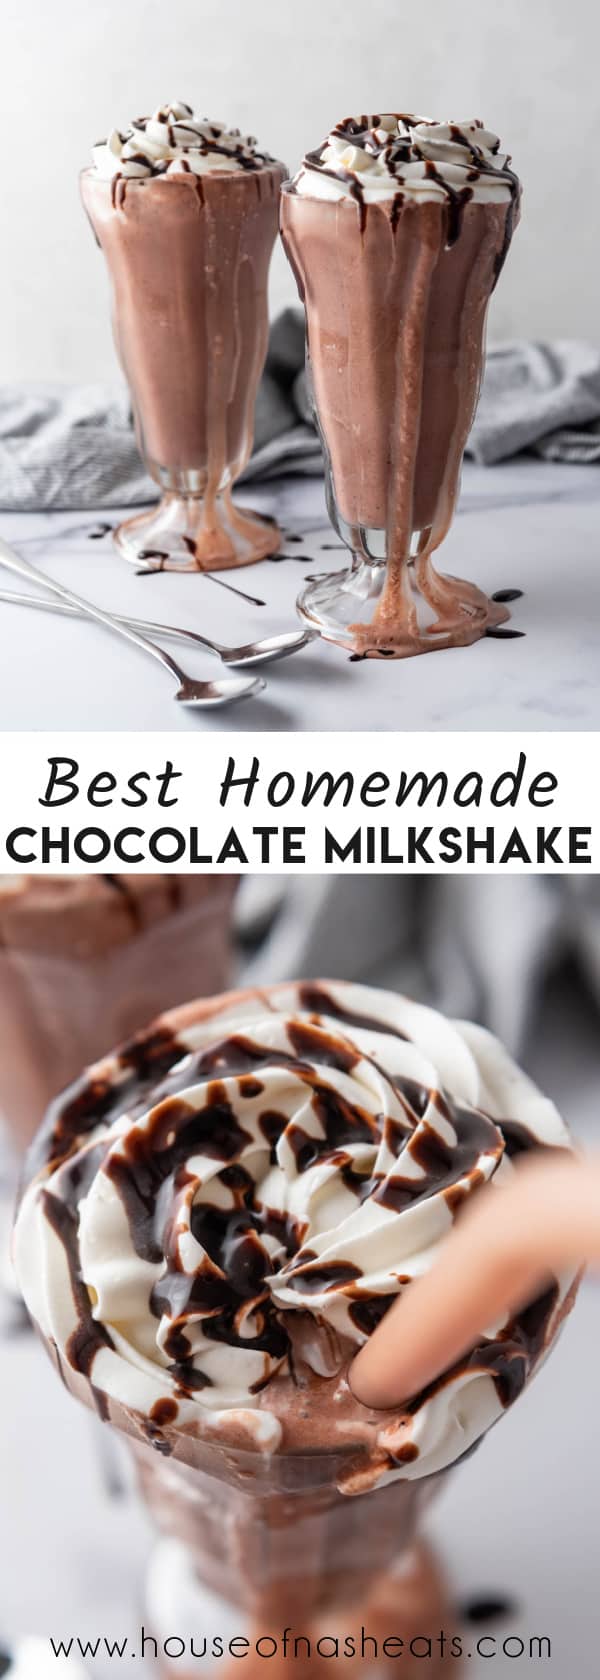 A collage of images of chocolate milkshakes with text overlay.